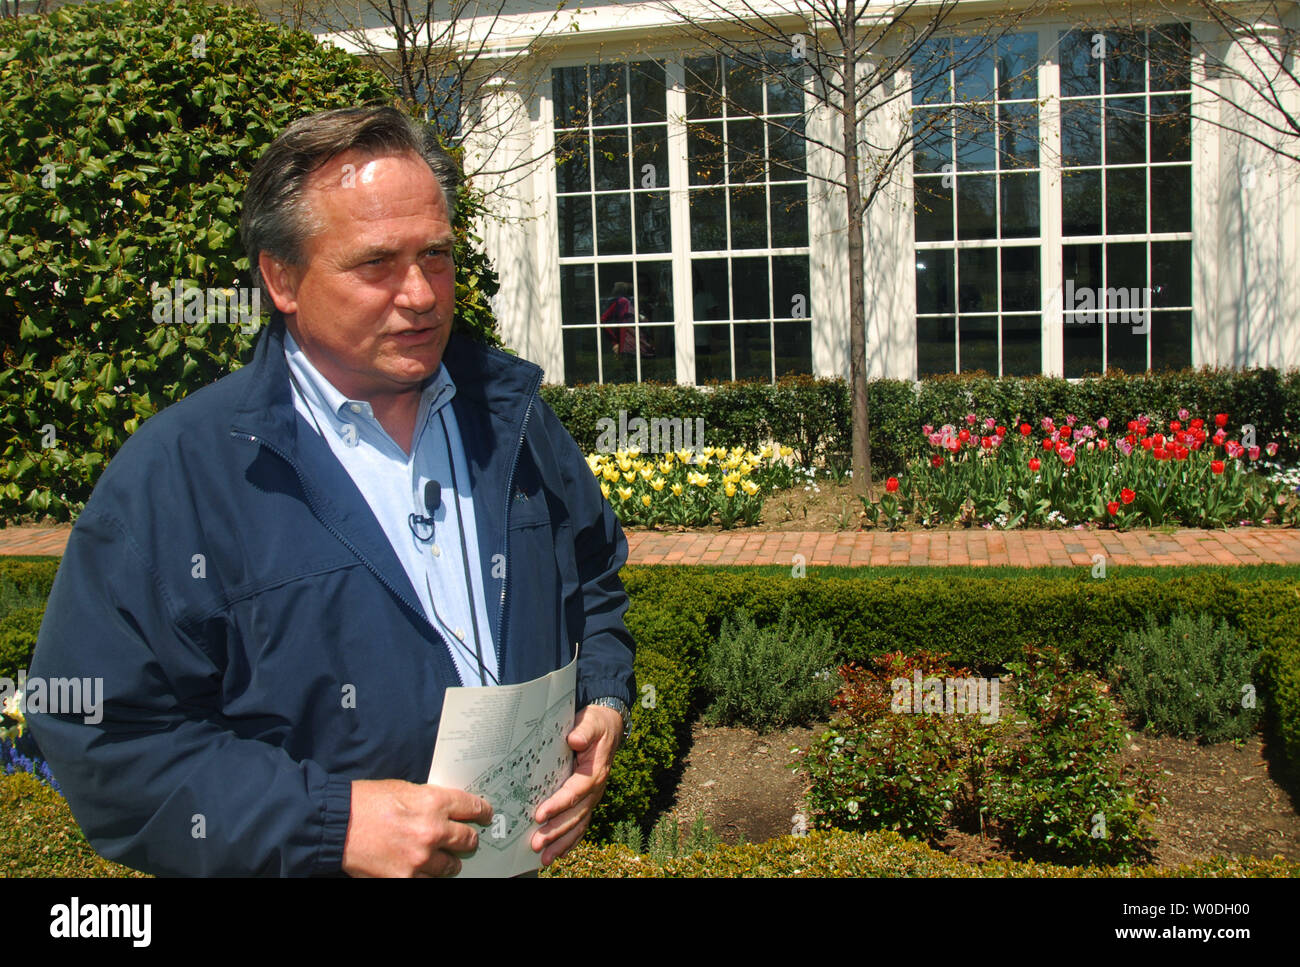 White House Horticulturist Dale Haney speaks to the press while standing in the Jacqueline Kennedy Garden at the White House in Washington on April 20, 2007. The White House is inviting the public to tour the grounds and gardens this weekend for the annual spring tour. (UPI Photo/Alexis C. Glenn) Stock Photo